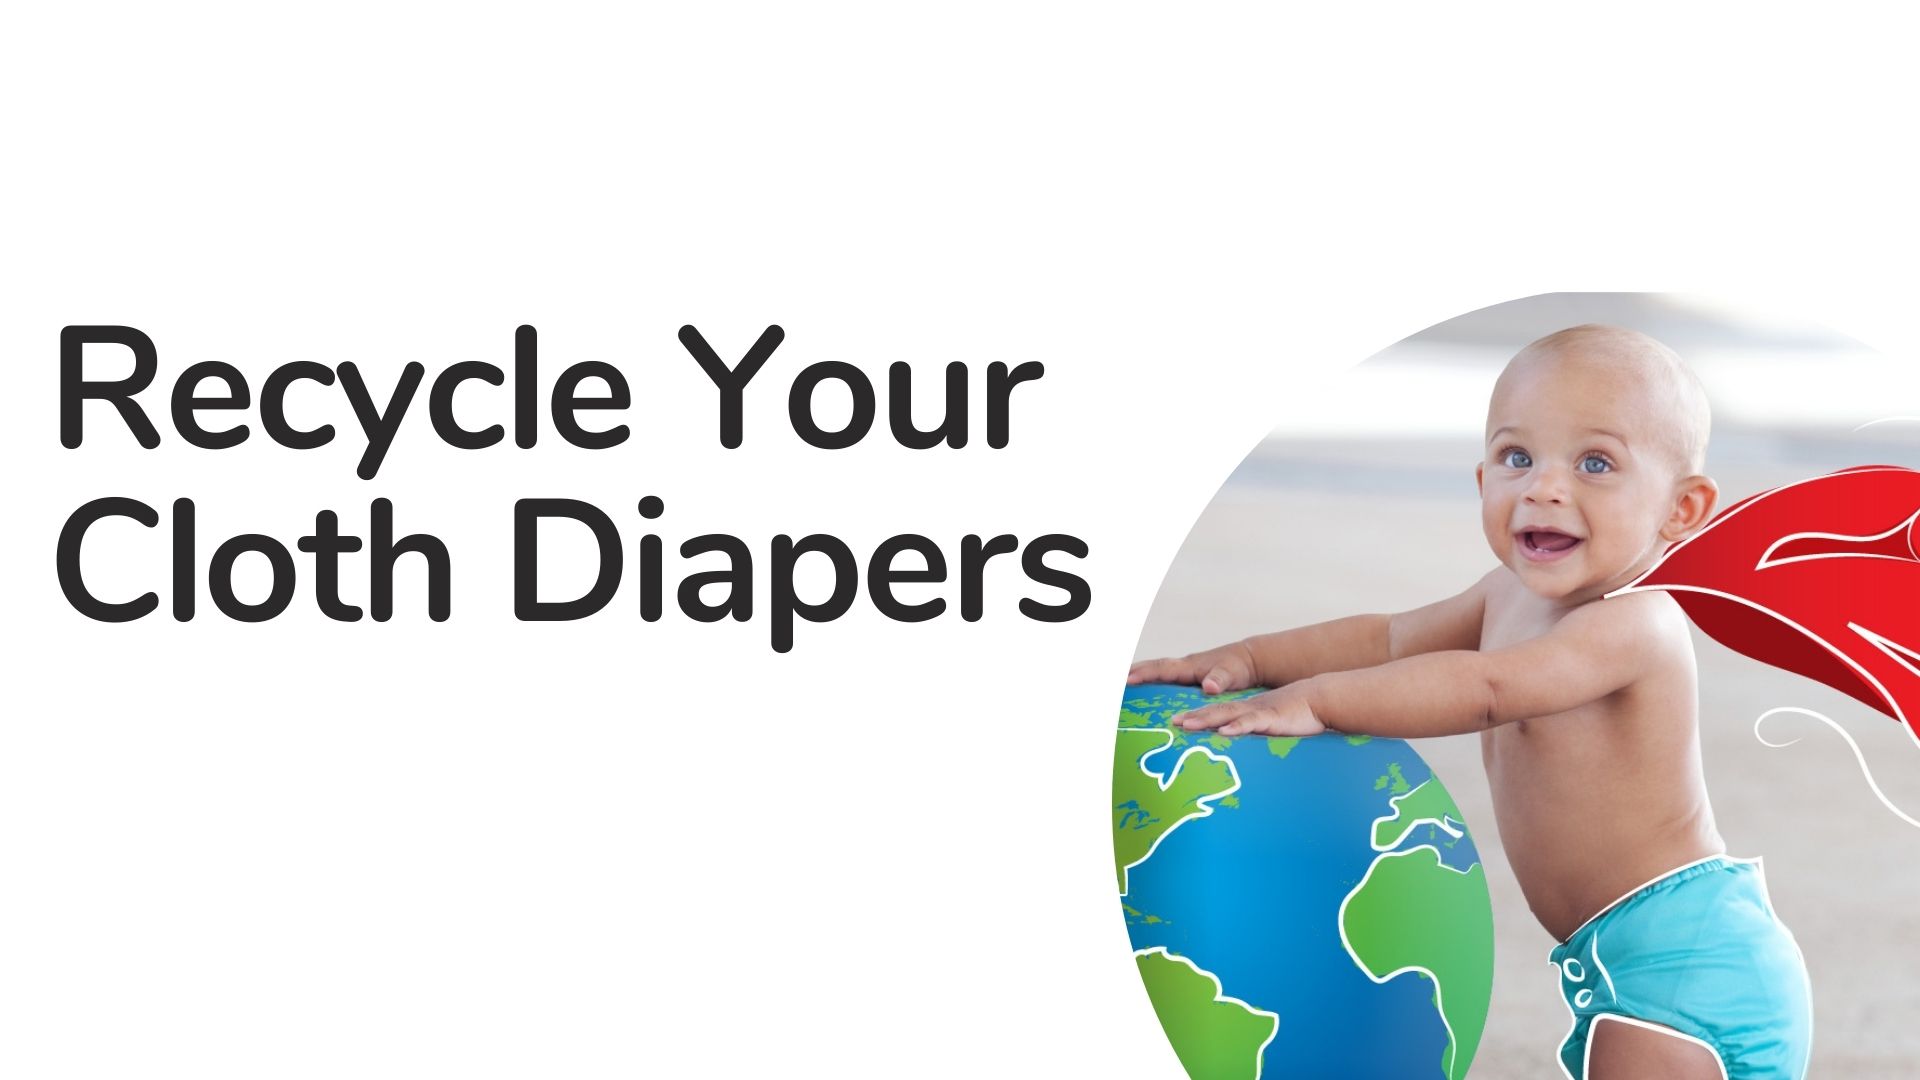 Recycle your cloth diapers